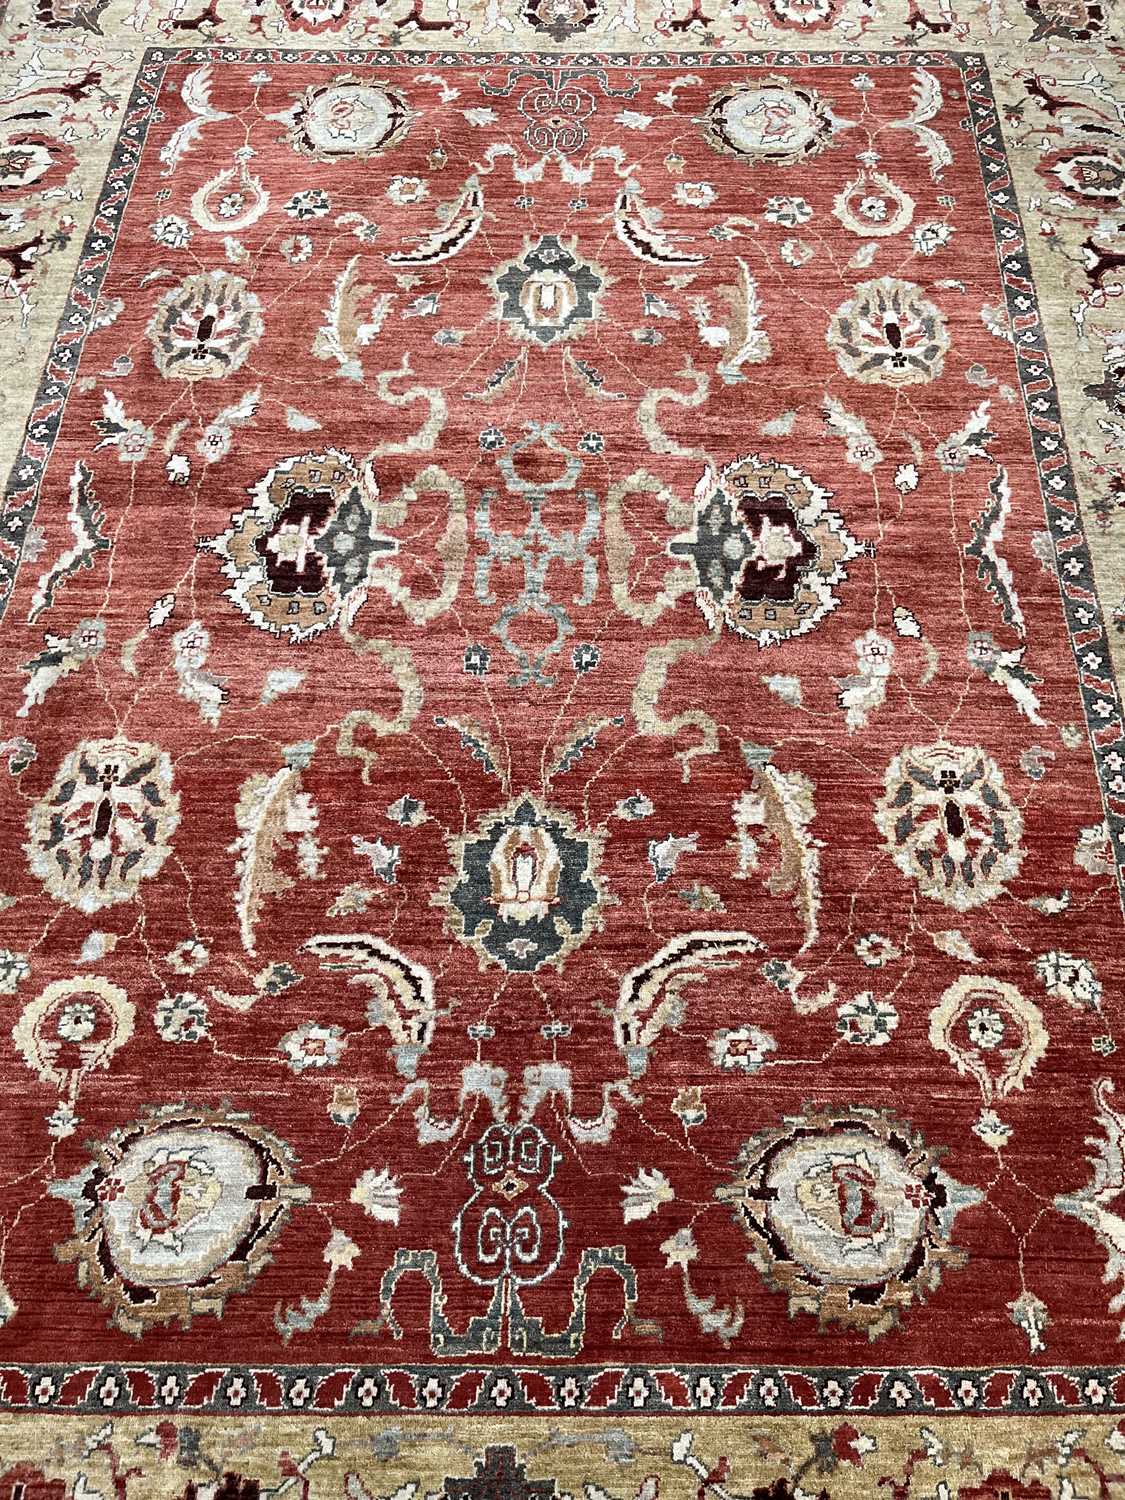 A LARGE RUG, 20TH CENTURY - Image 4 of 4